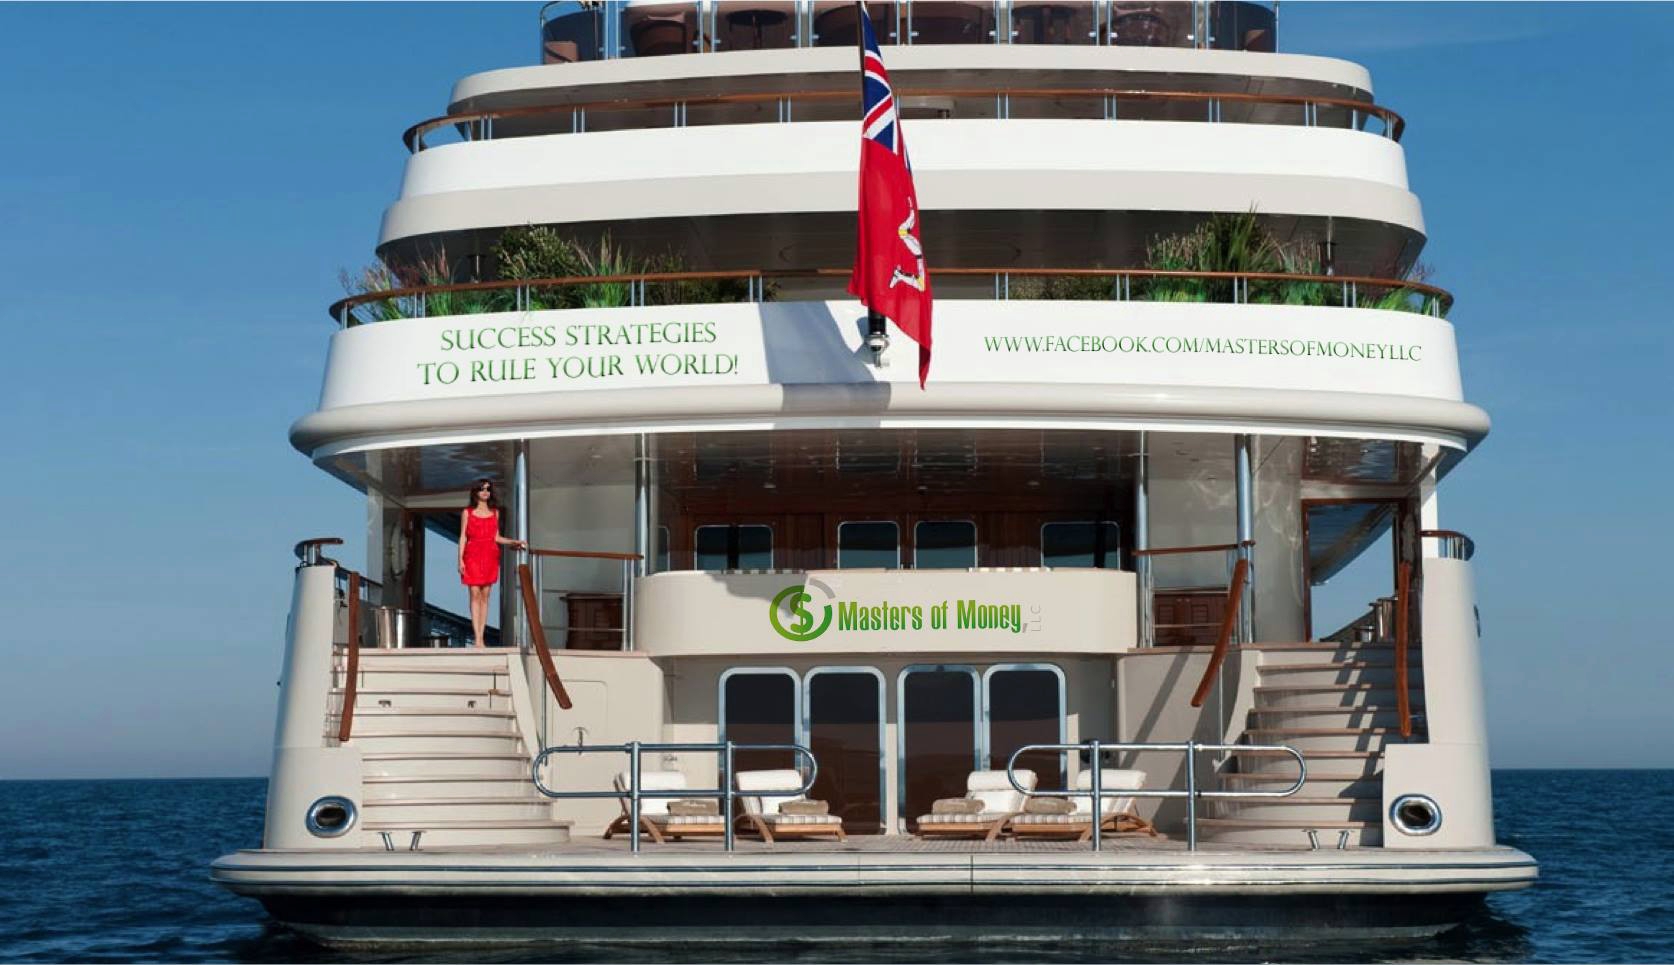 Masters of Money LLC - Success Strategies To Rule Your World! - Luxury Yacht Picture